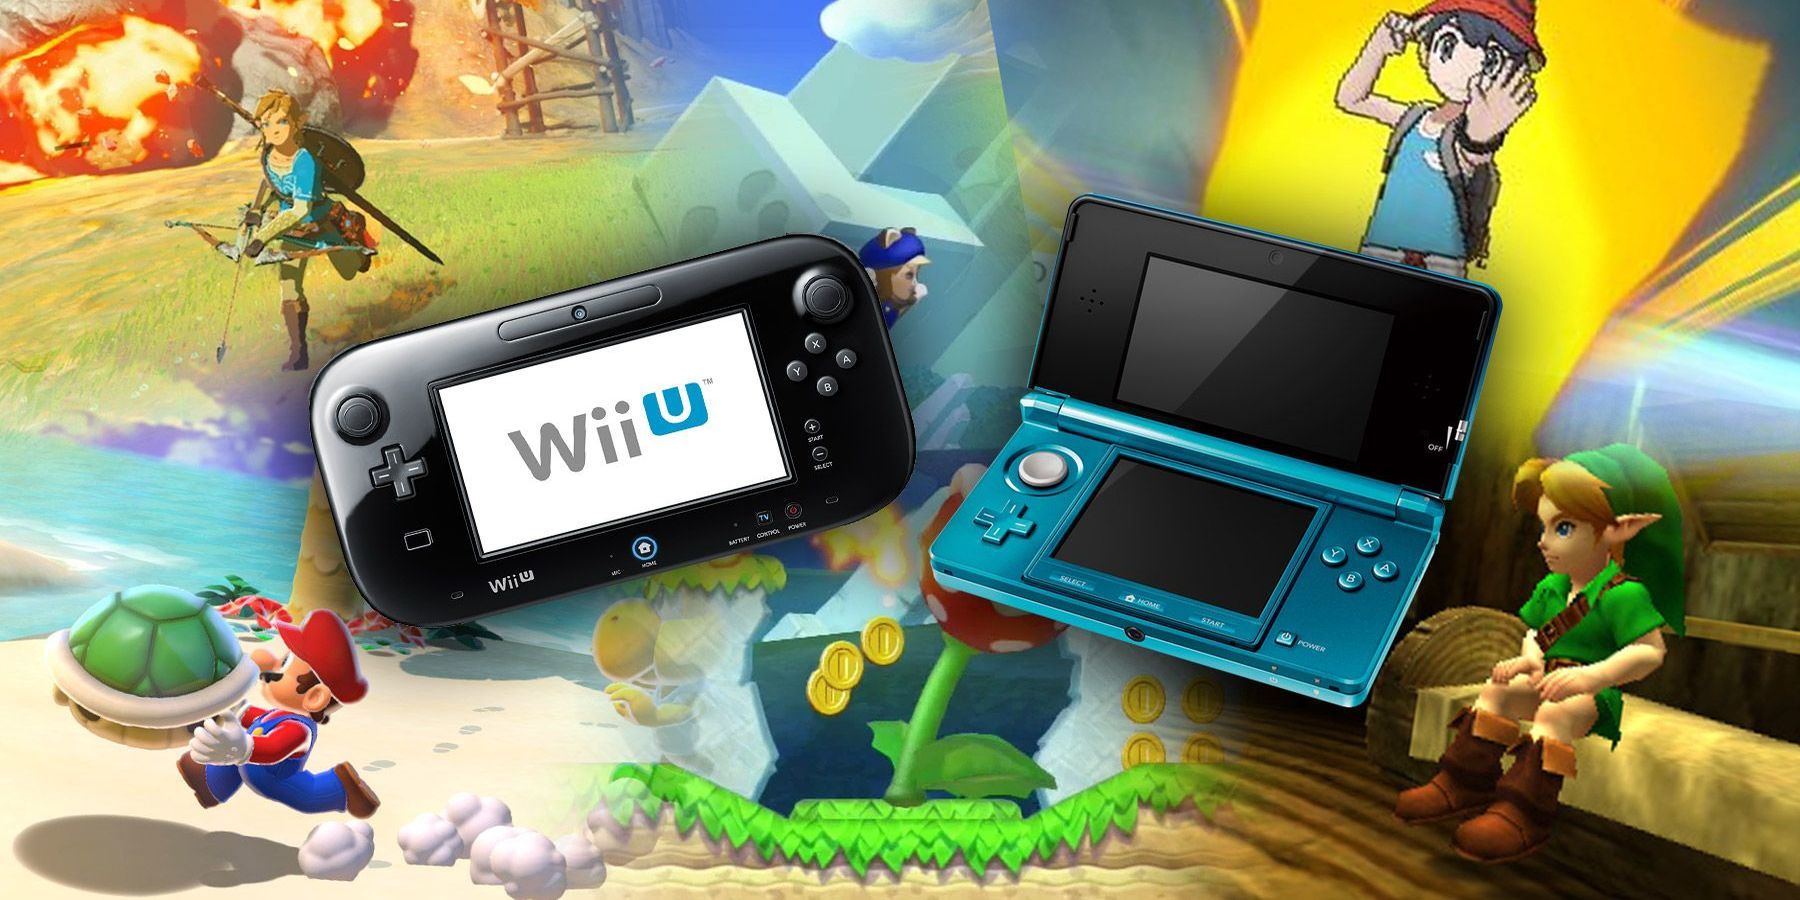 The Wii U/3DS eShop Closure Makes Another Great Argument for